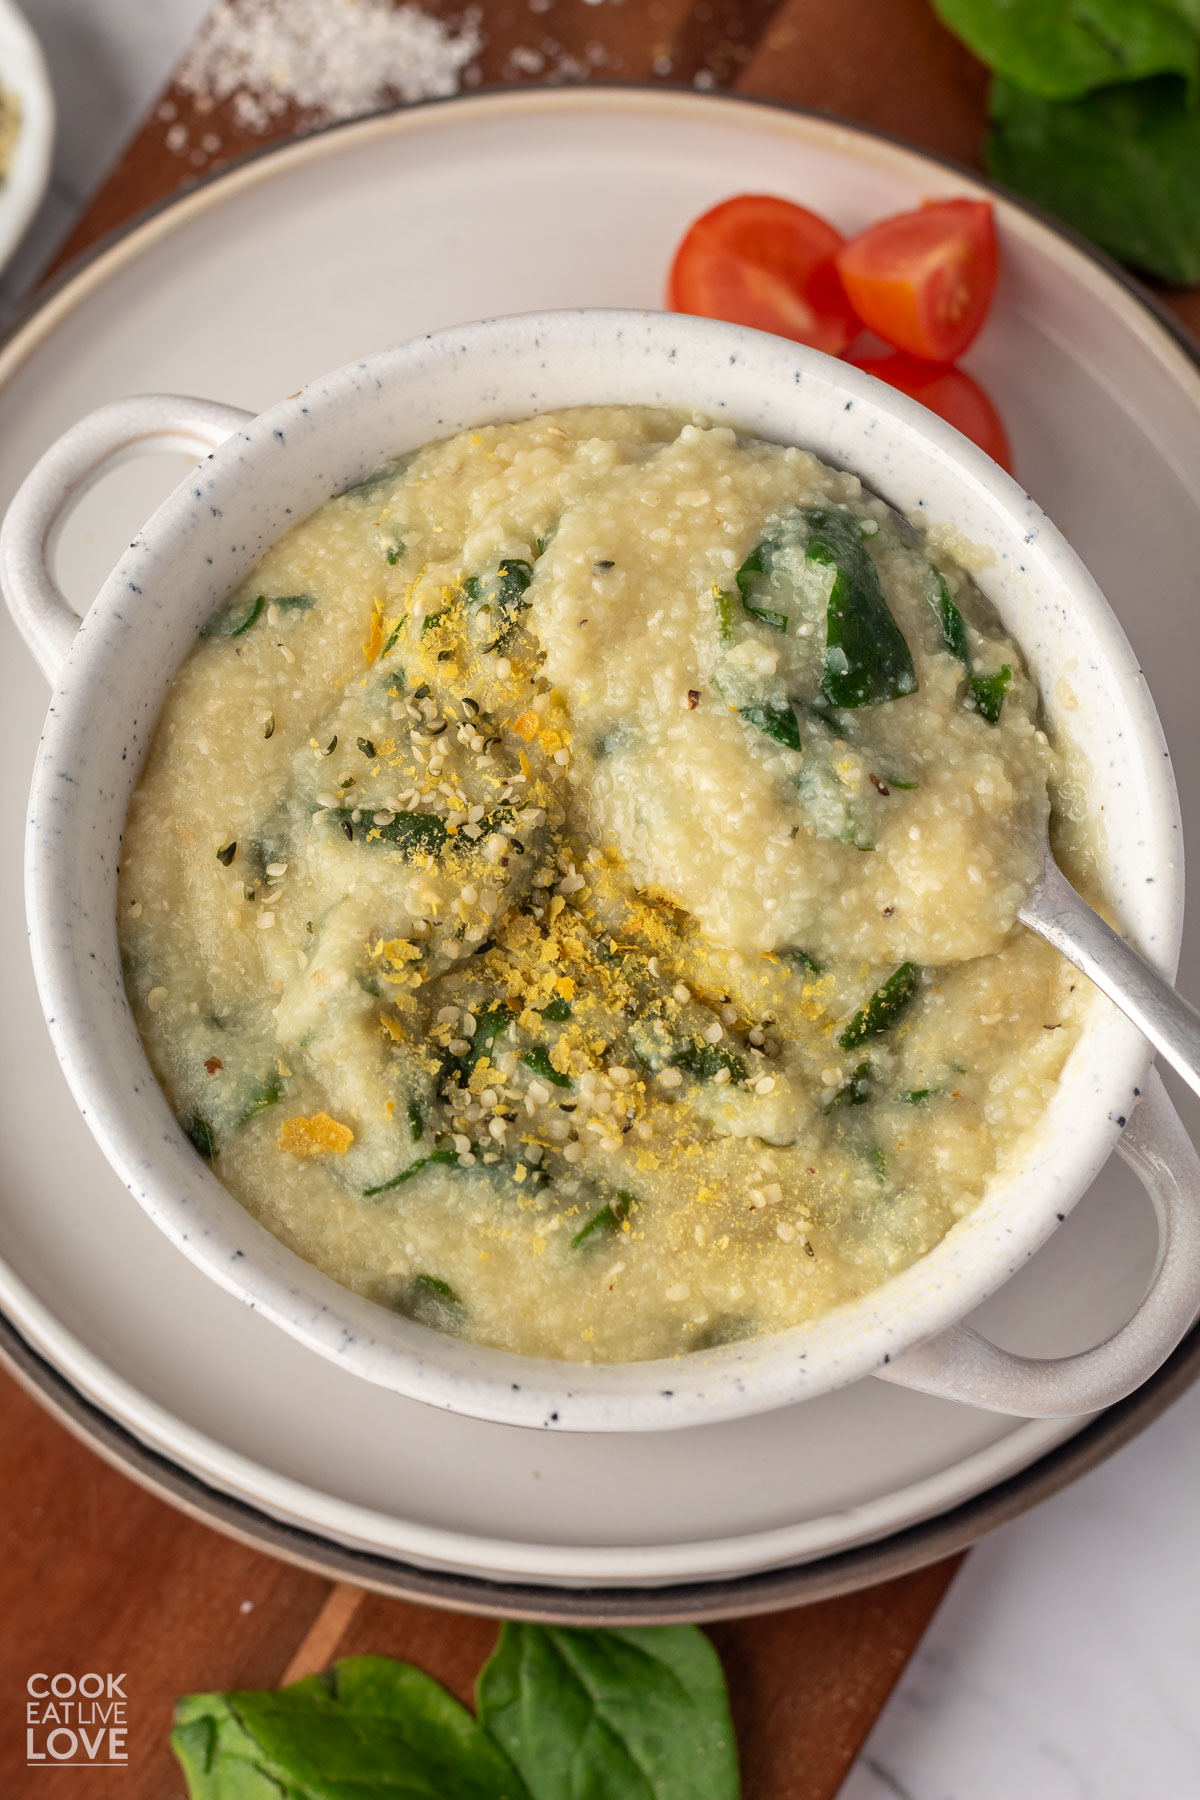 A bowl of vegan cheese grits in a bowl with a spoon.